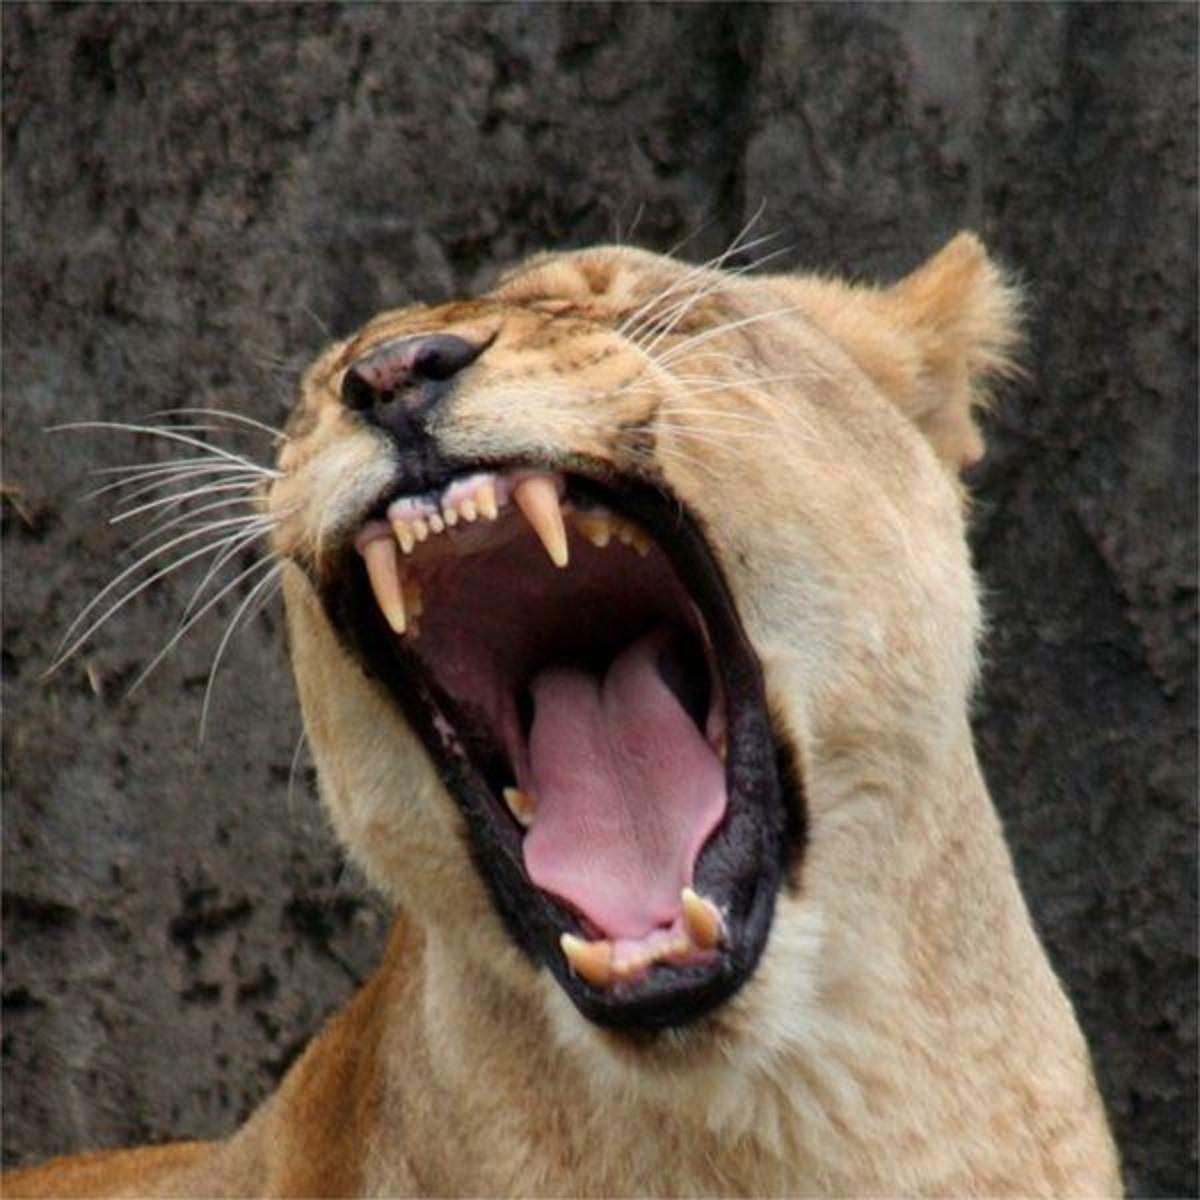 Female lion - take note of the sharp teeth that can instantly slice your flesh.Image credit: Mila Zinkova, Wikimedia commons 